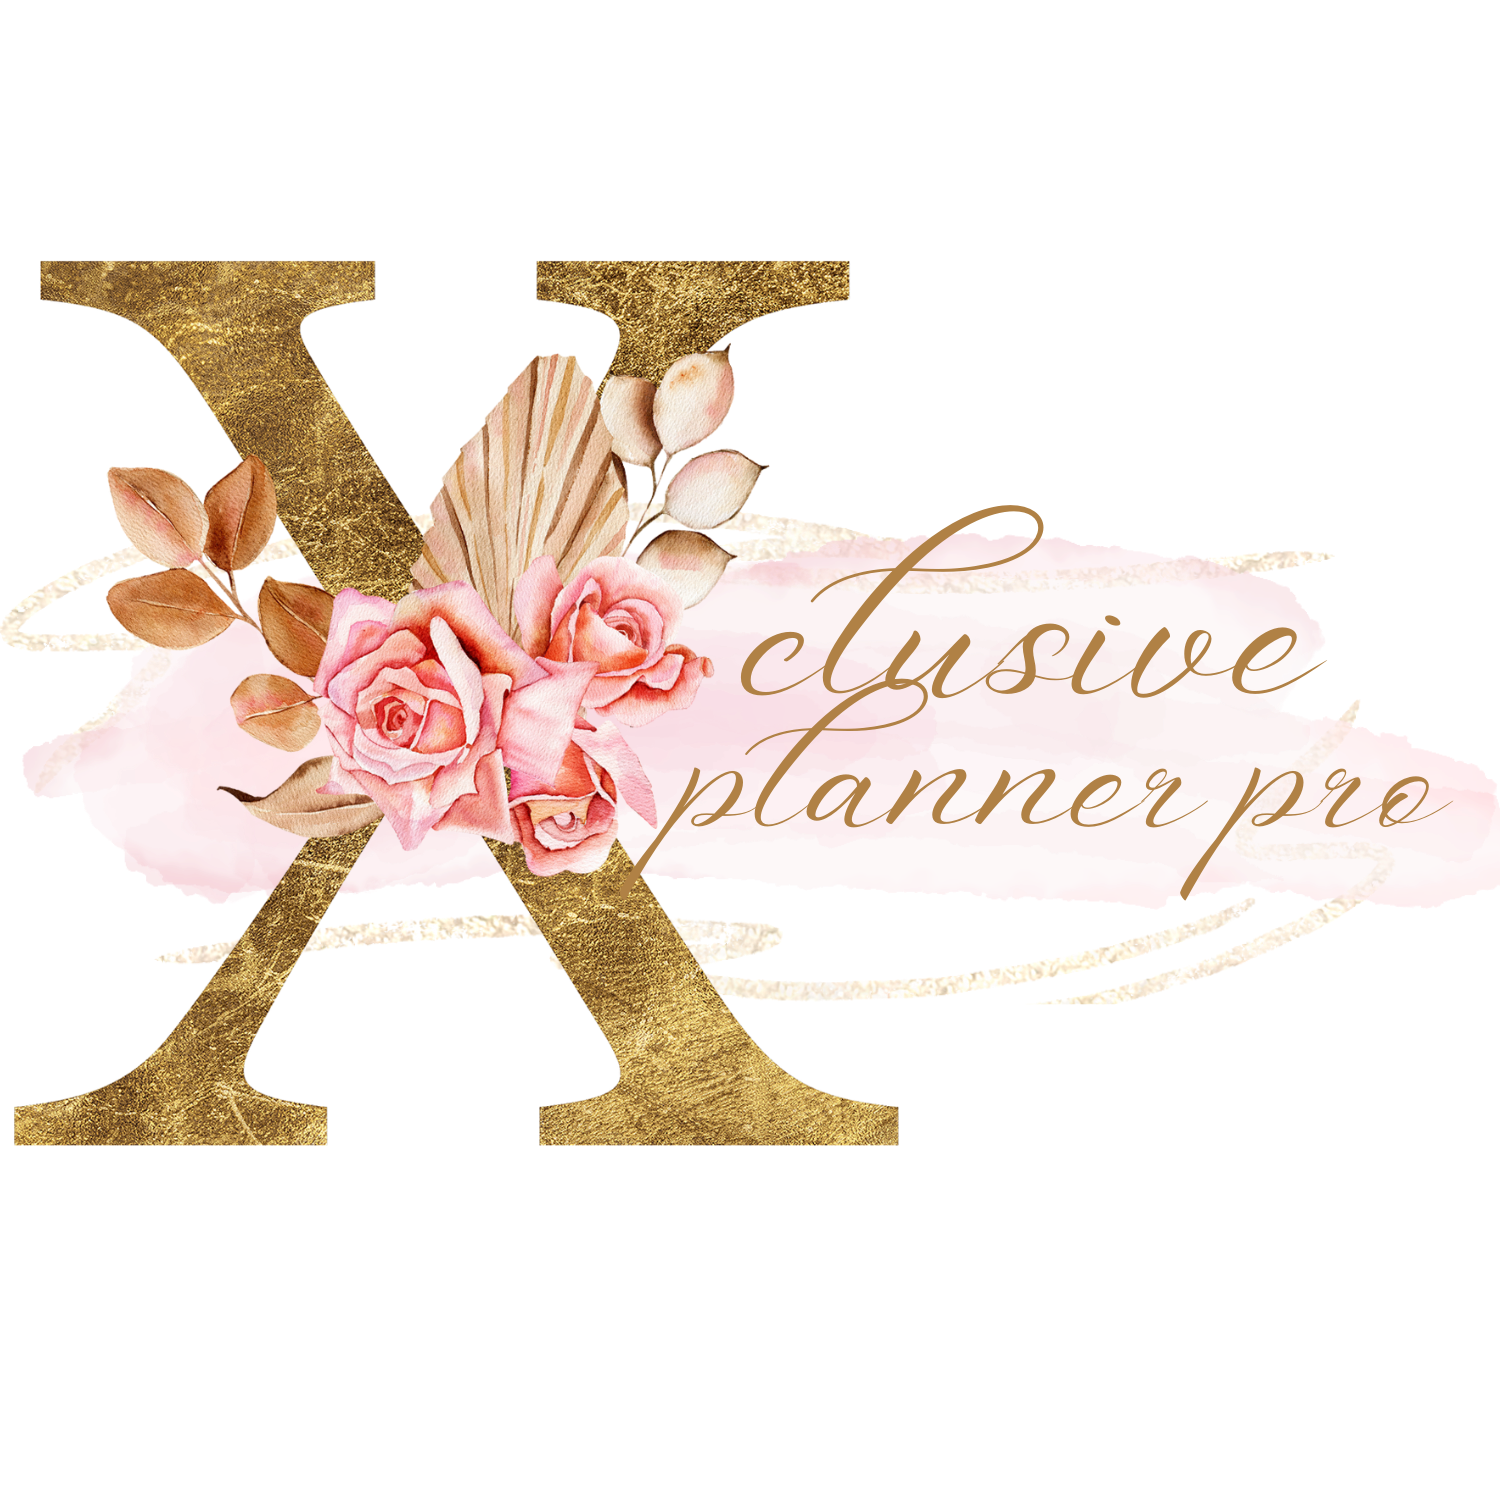 260-xclusive-planner-pro-logo---brown-16517771682806.png